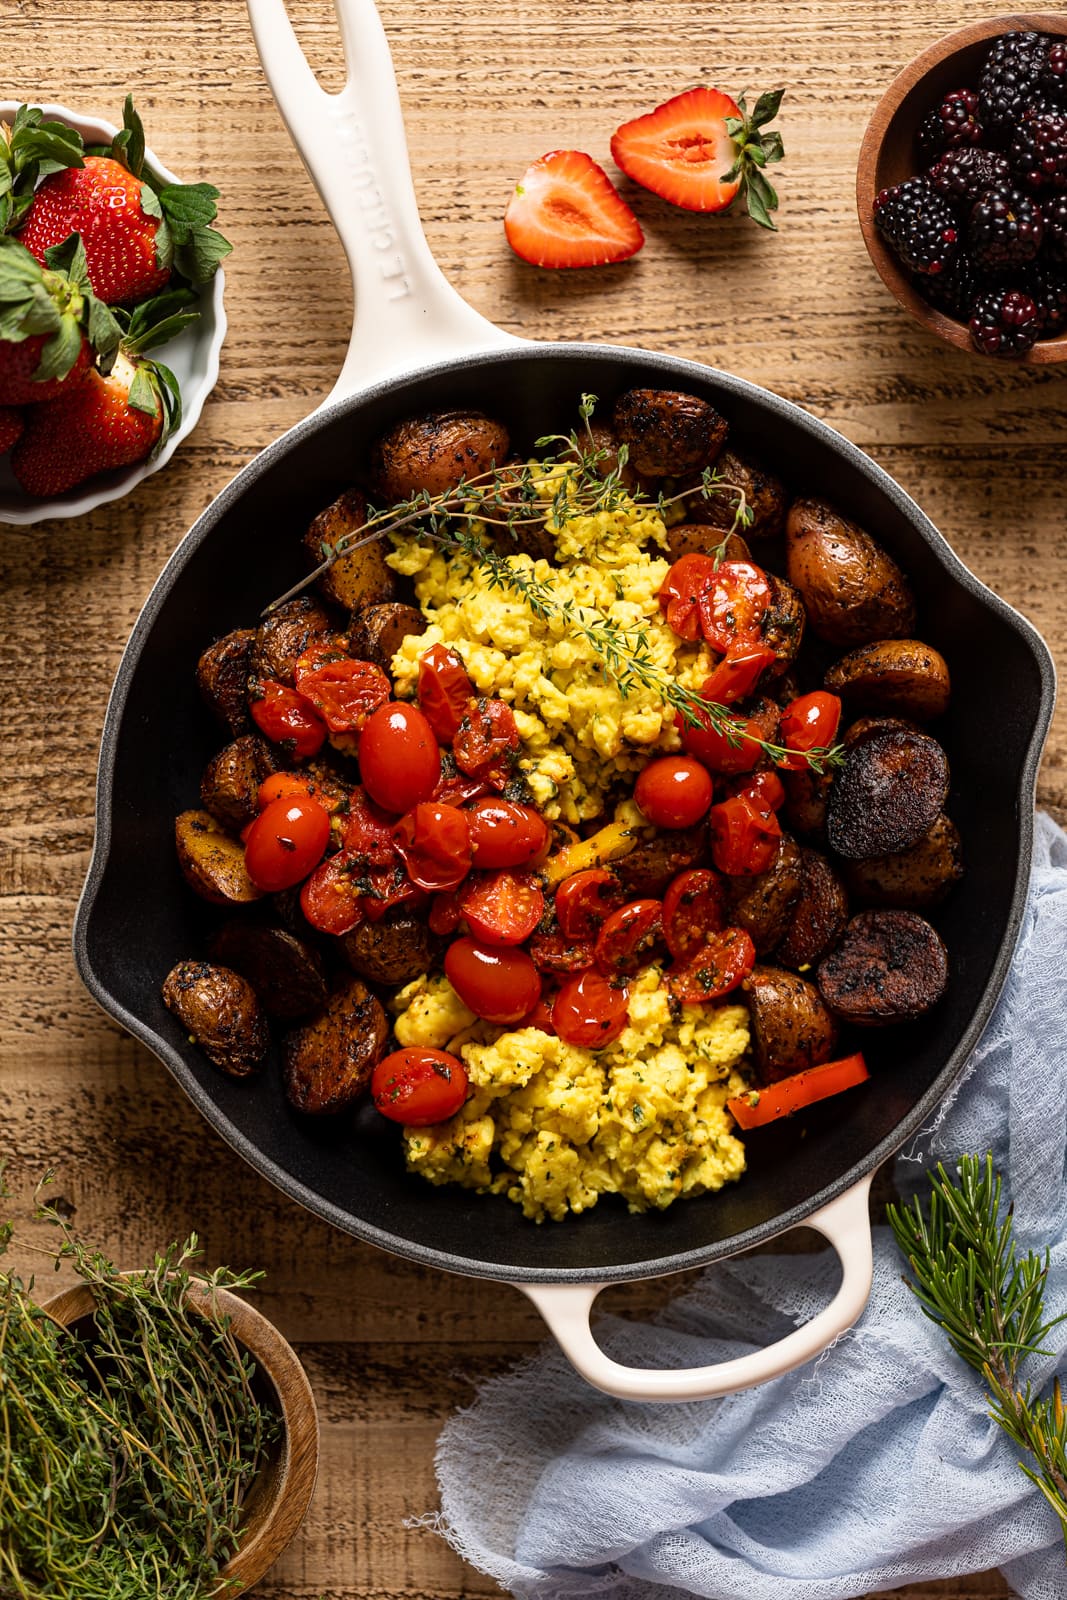 Overhead shot of a skillet of Vegan Breakfast Eggs with Potatoes